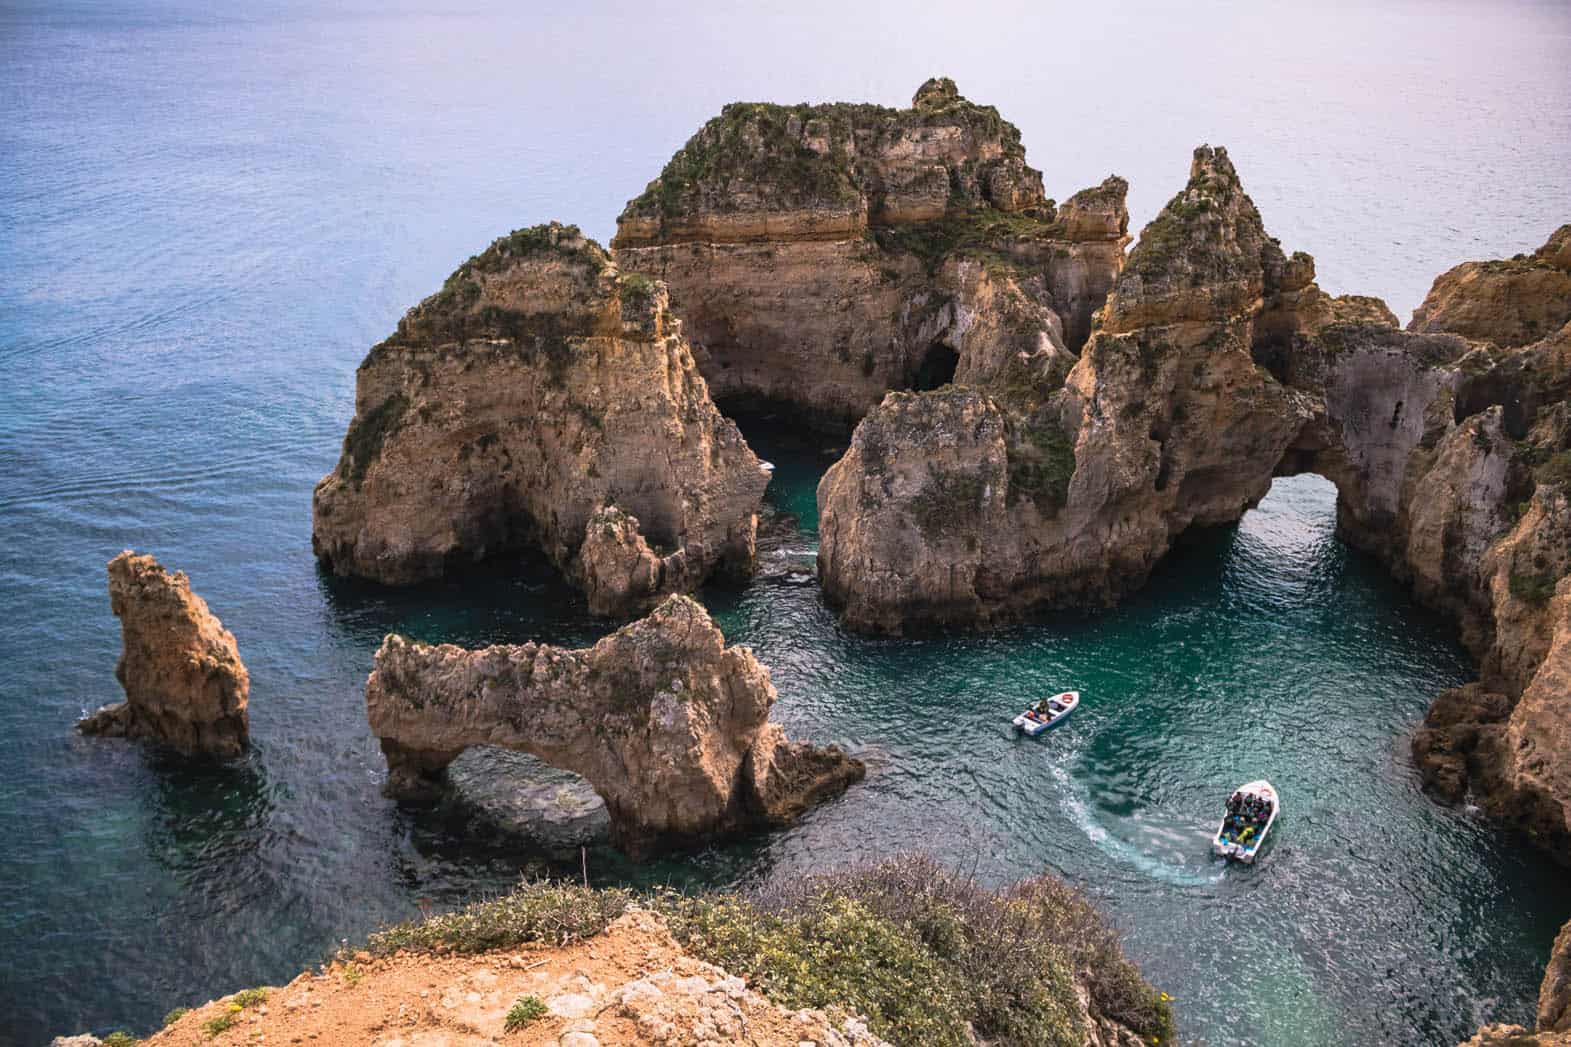 Ponta da Piedade in Portugal, awesome view of rocky cliffs and two boats.